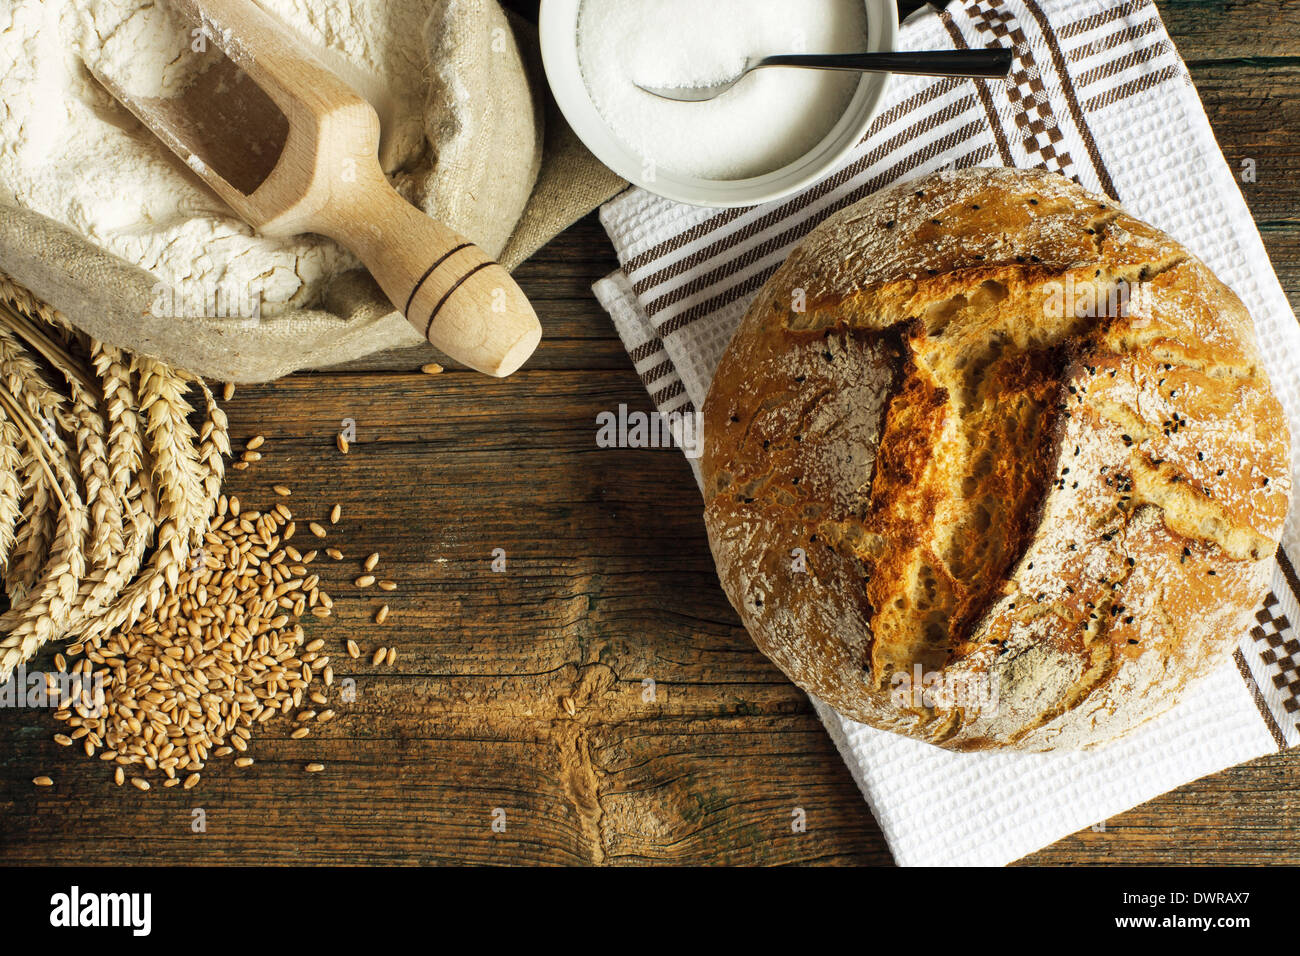 Home made bread on wooden table Stock Photo